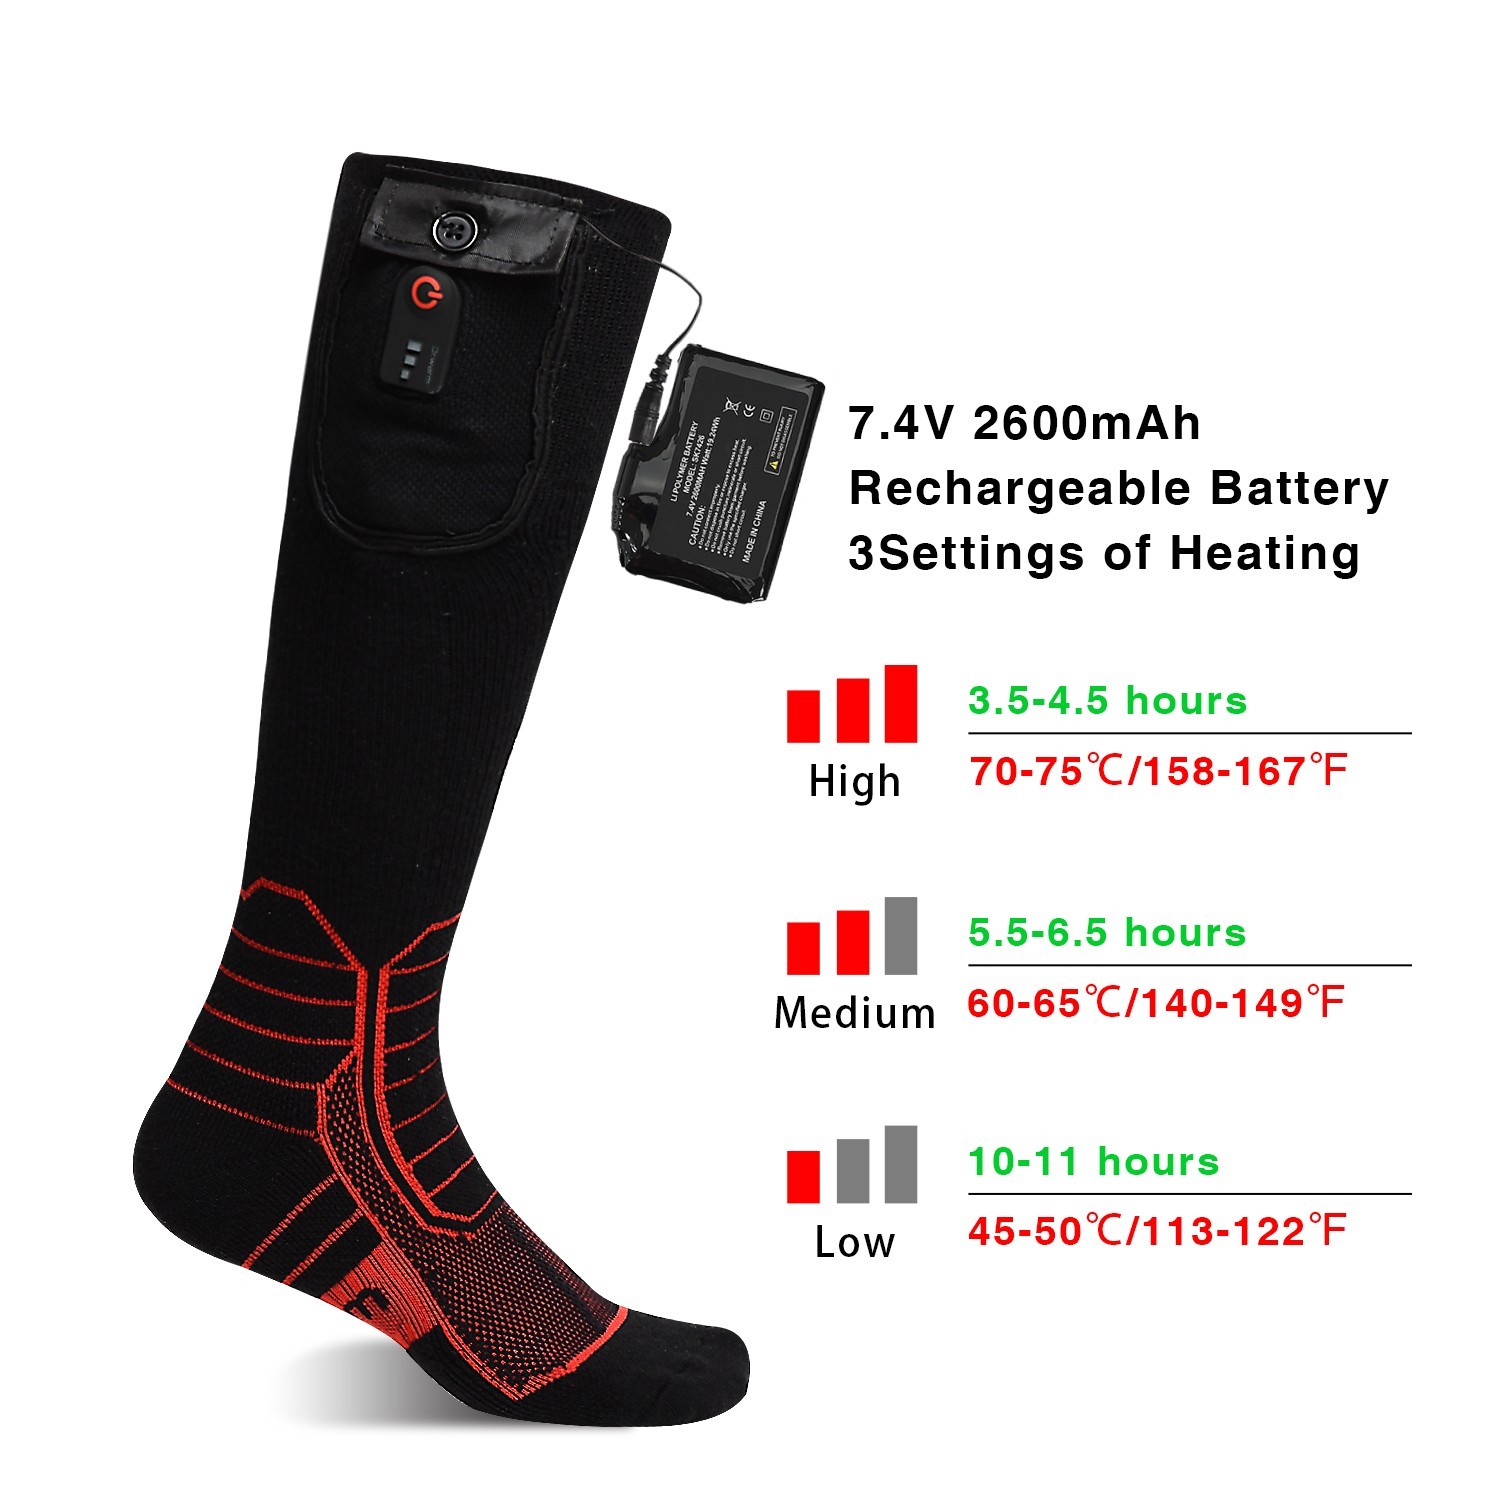 Dr. Warm heated heated socks for outdoor